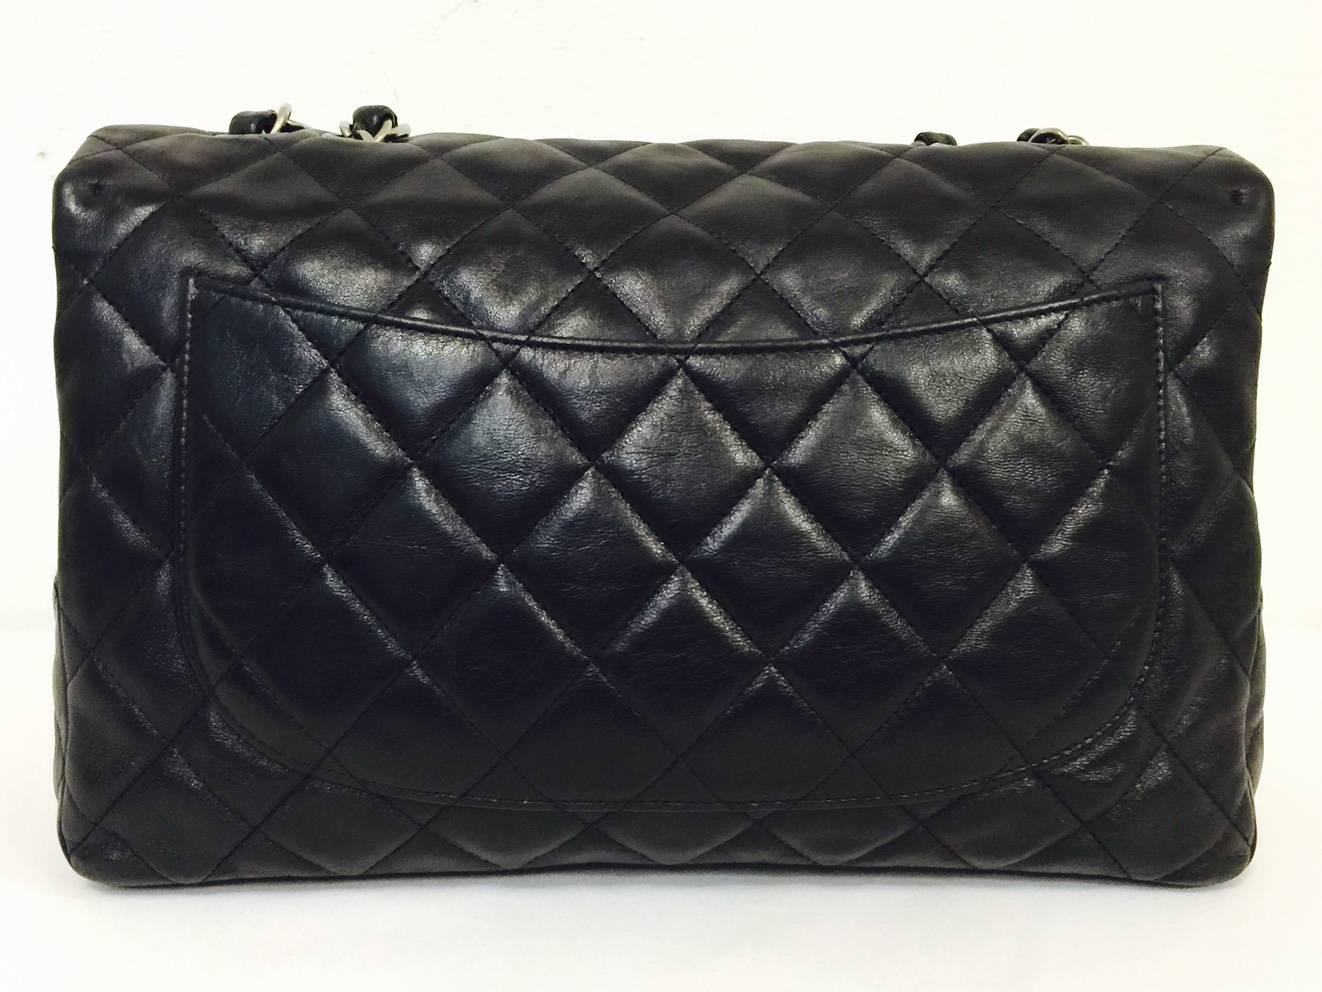 Women's Chanel 2.55 Reissue Bag Size 226 in Black Quilted Lambskin For Sale